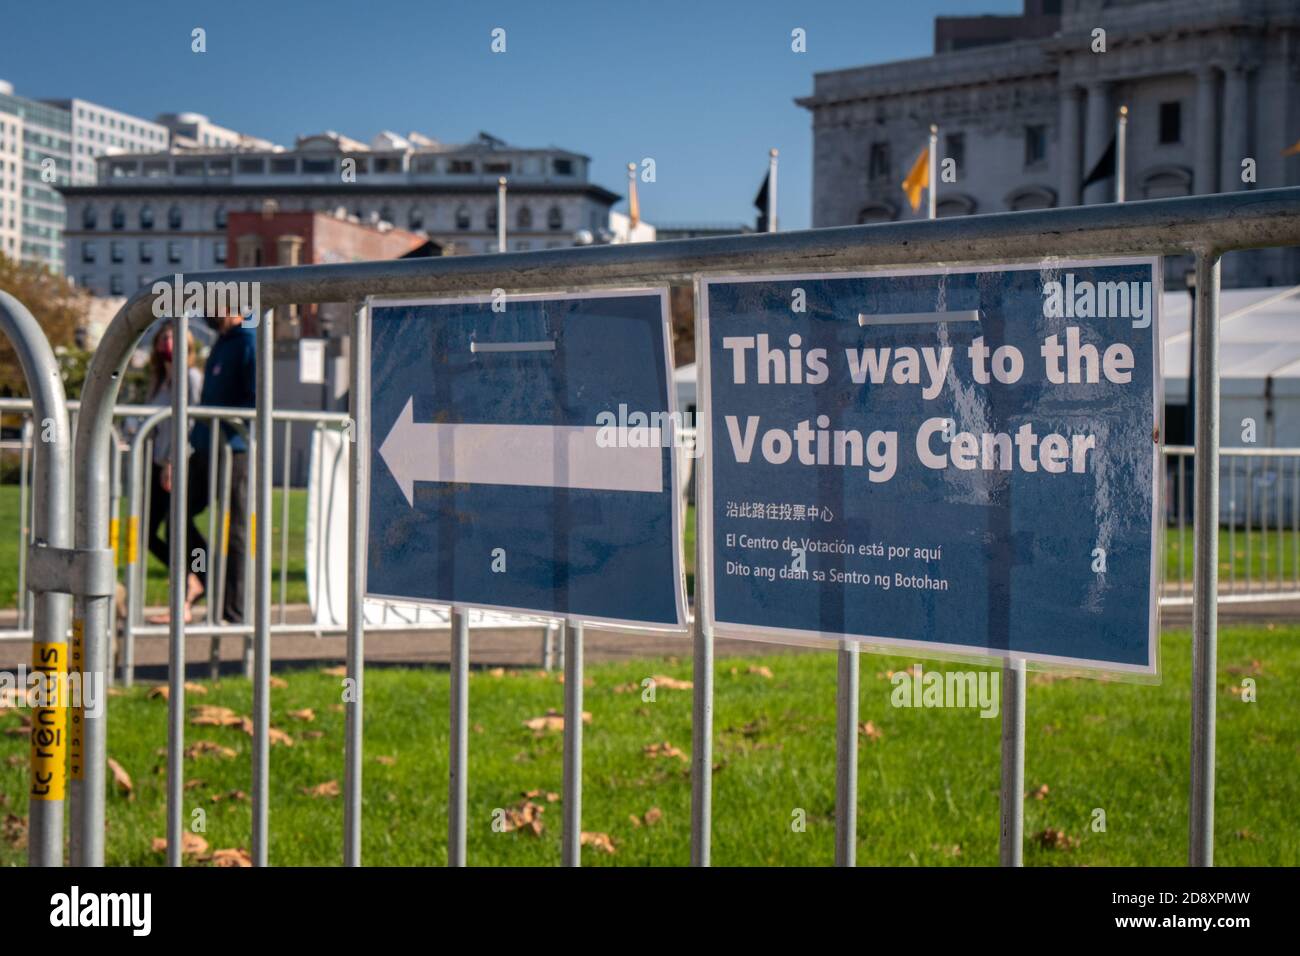 San Francisco’s Voting Center, November 1, 2020. Outside of Bill Graham Civic Auditorium, opens for voters to vote in-person or drop off vote-by-mail Stock Photo